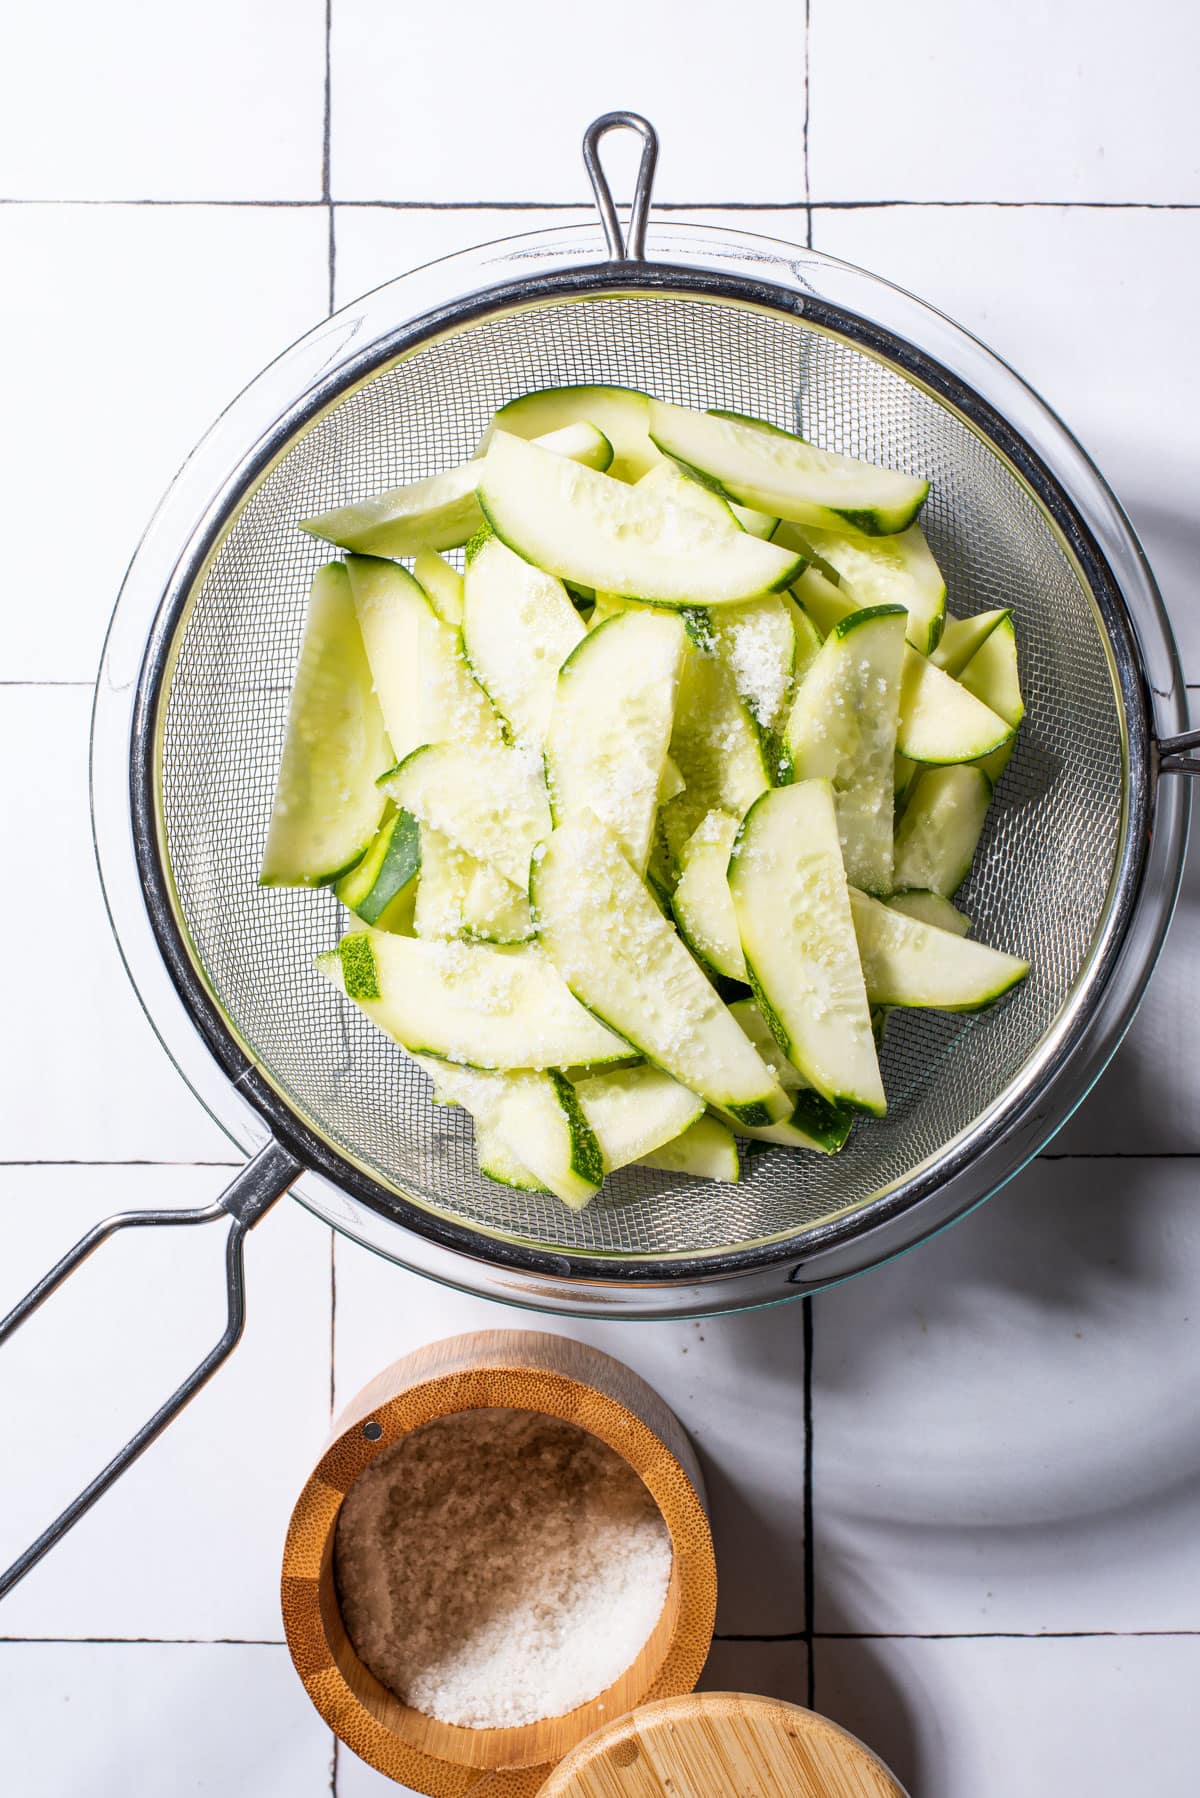 Sliced cucumbers in a mesh strainer next to salt.